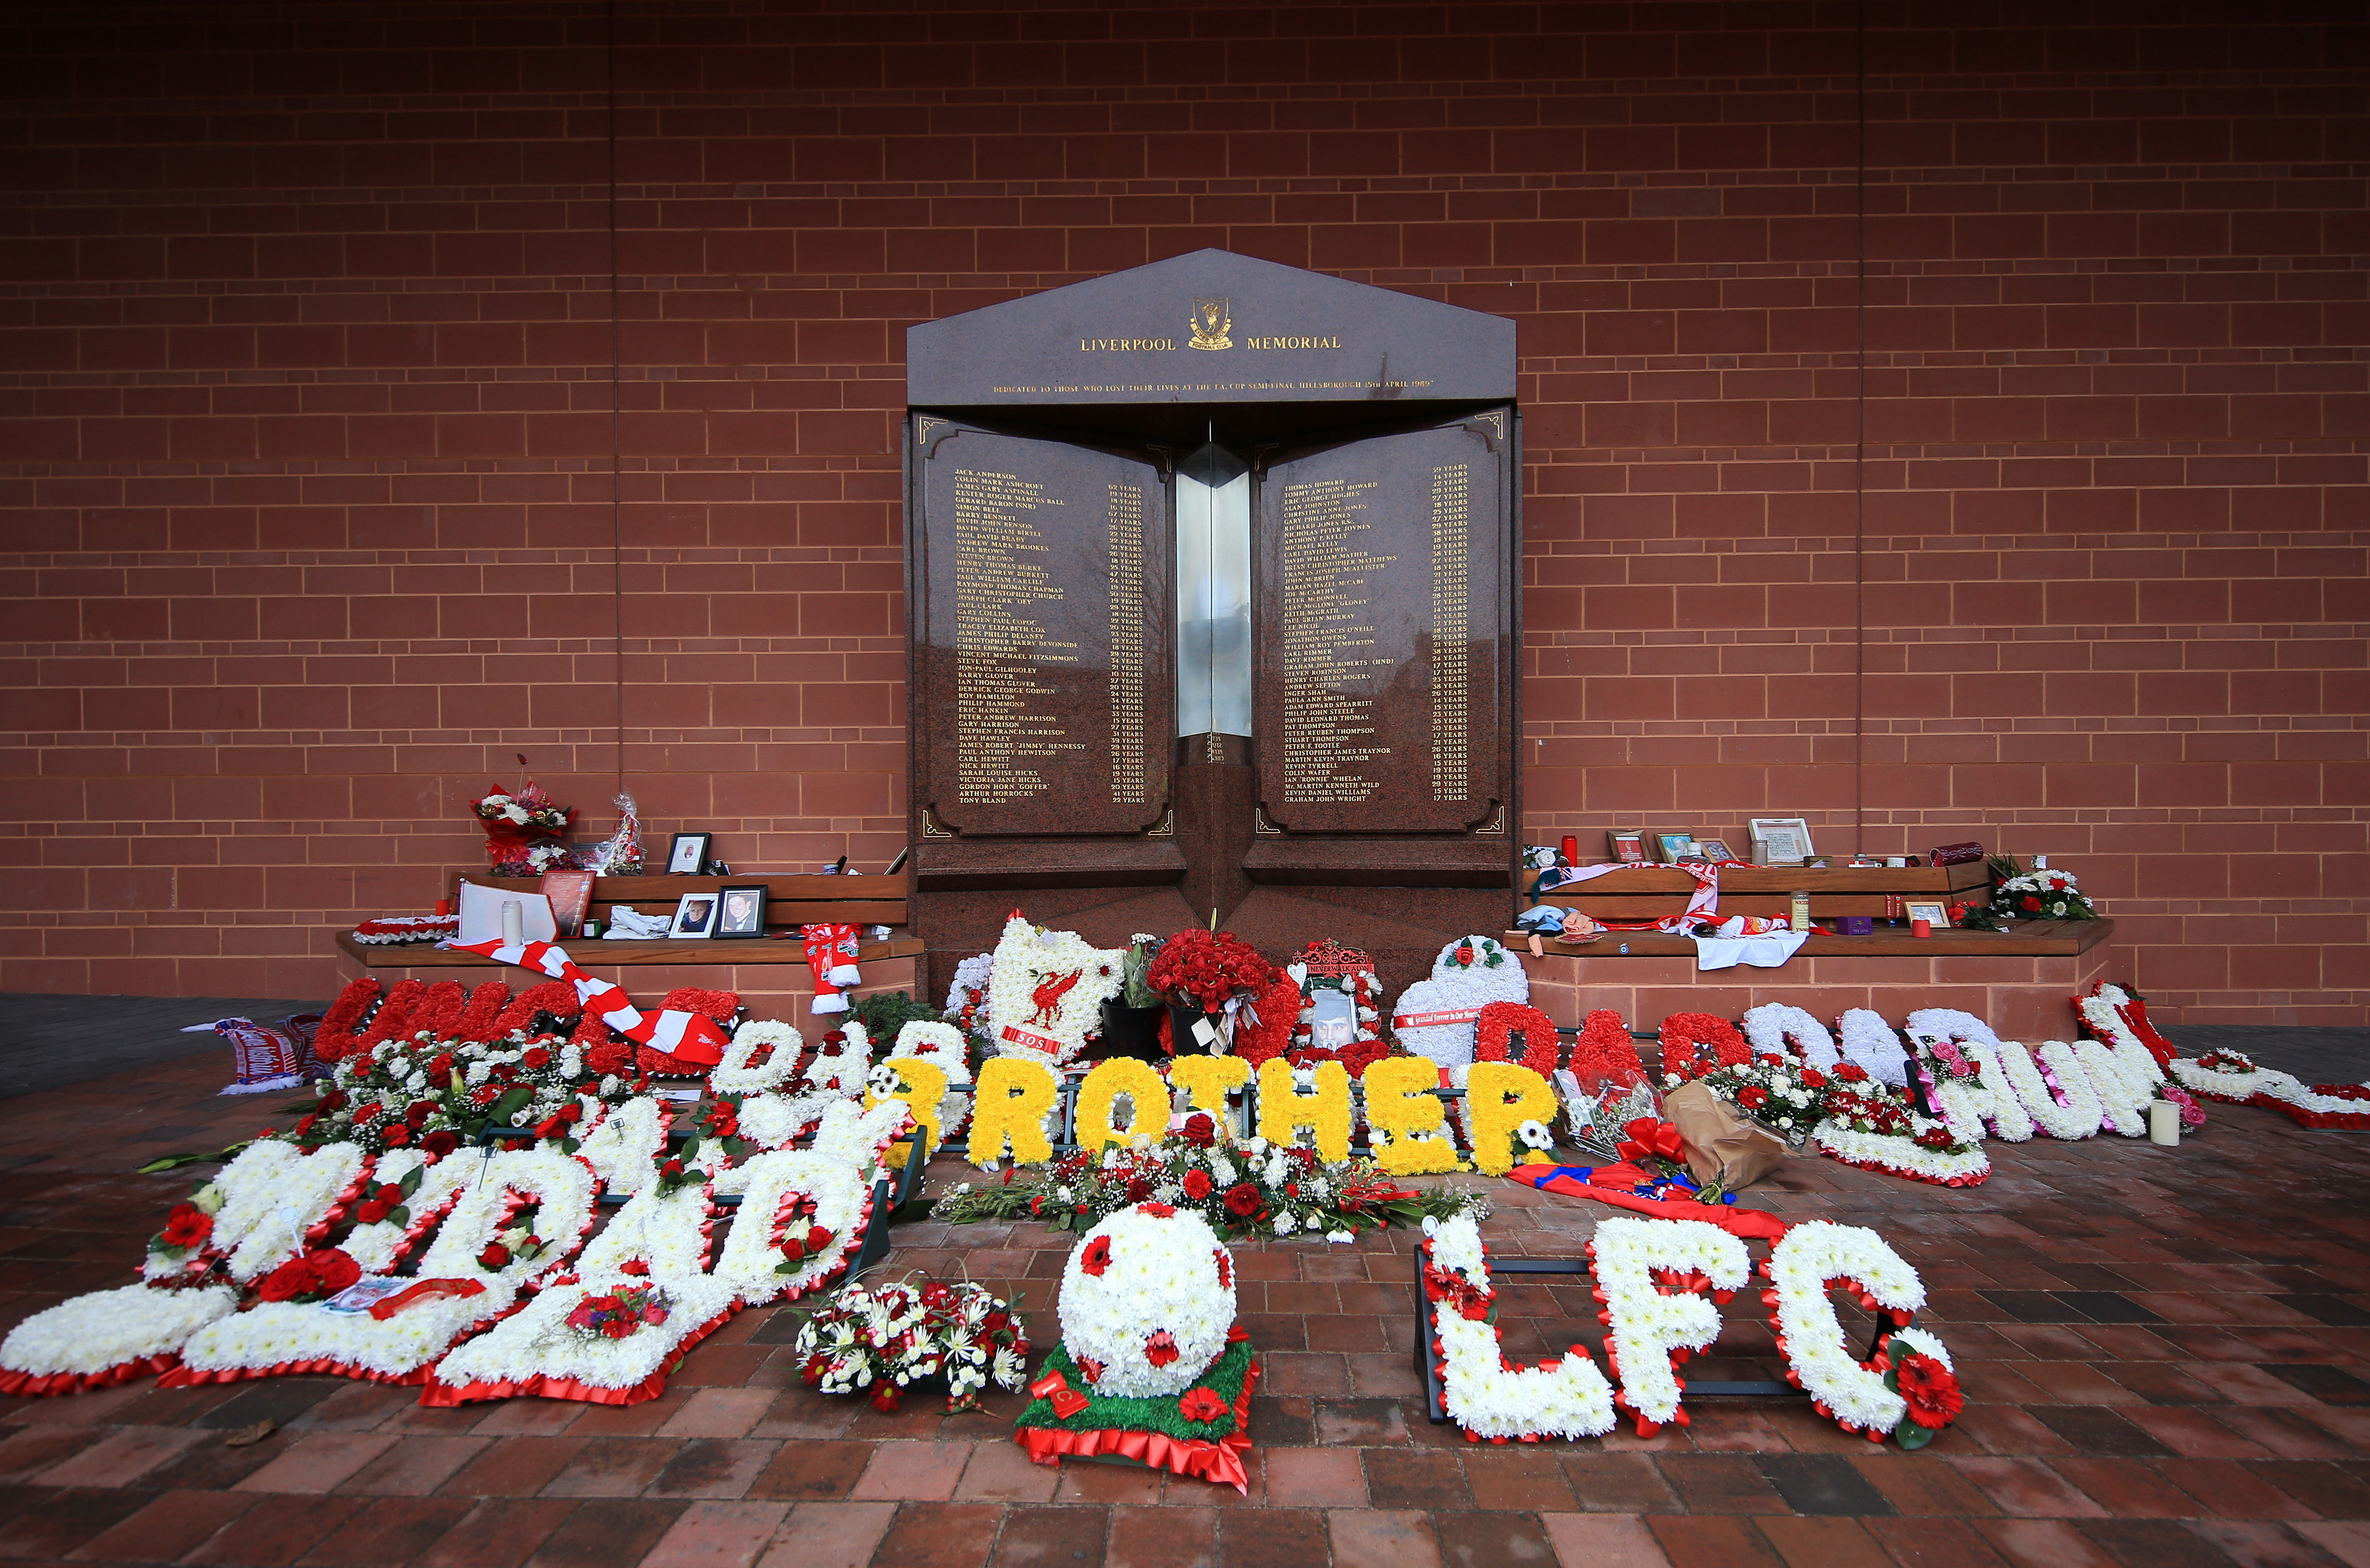 A permanent memorial at Anfield to the victims of Hillsborough has been a focal point for fans of all clubs for many years